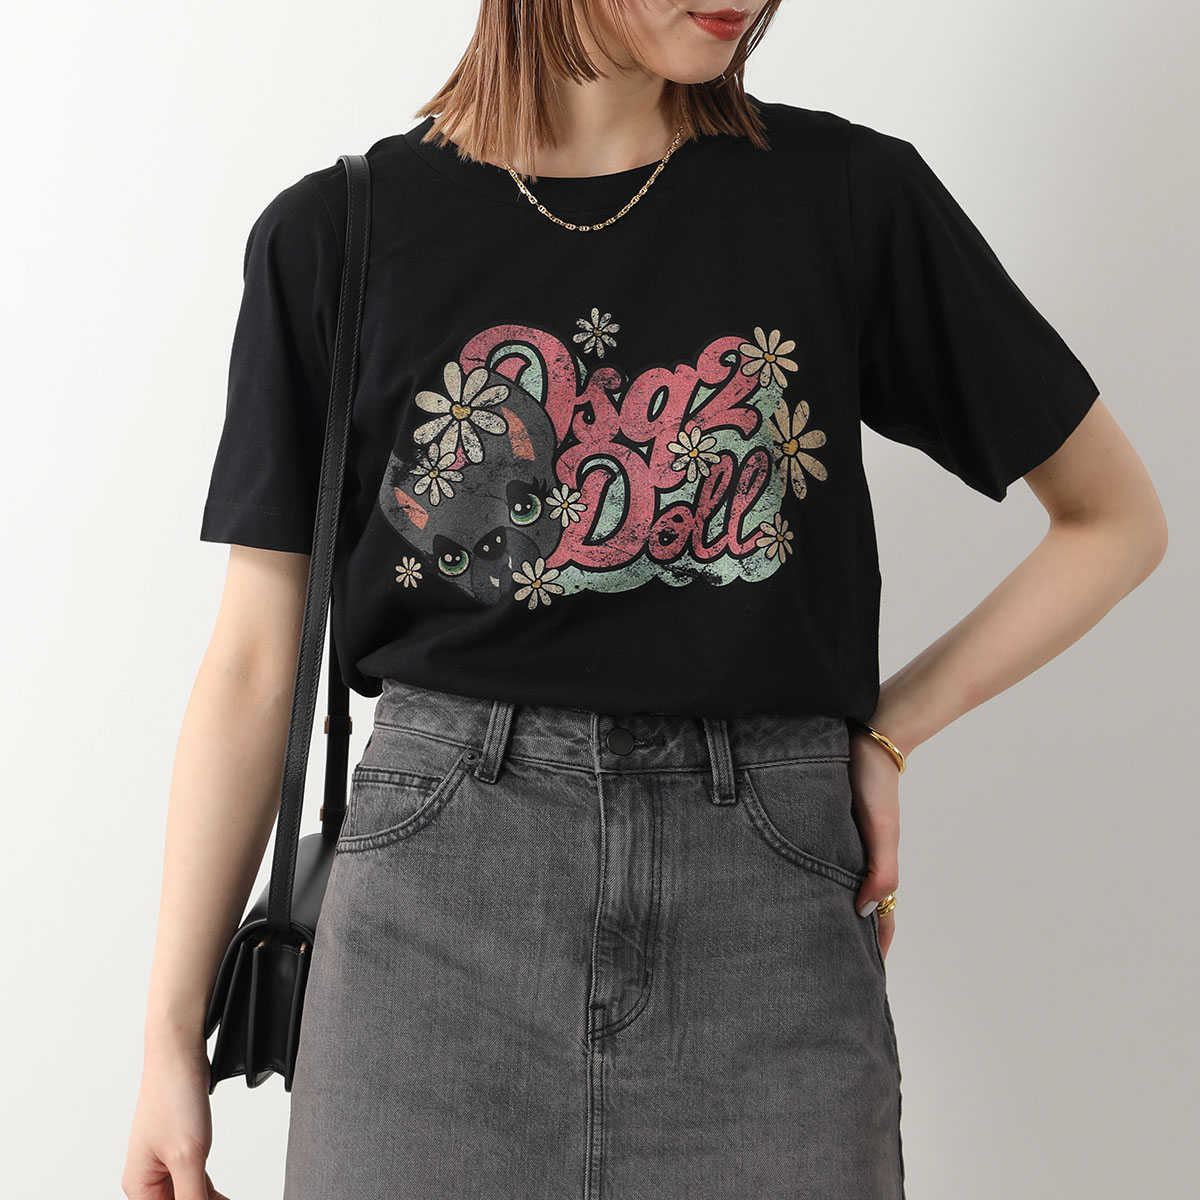 DSQUARED2 ディースクエアード Tシャツ HILDE DOLL EASY FIT S75GD...